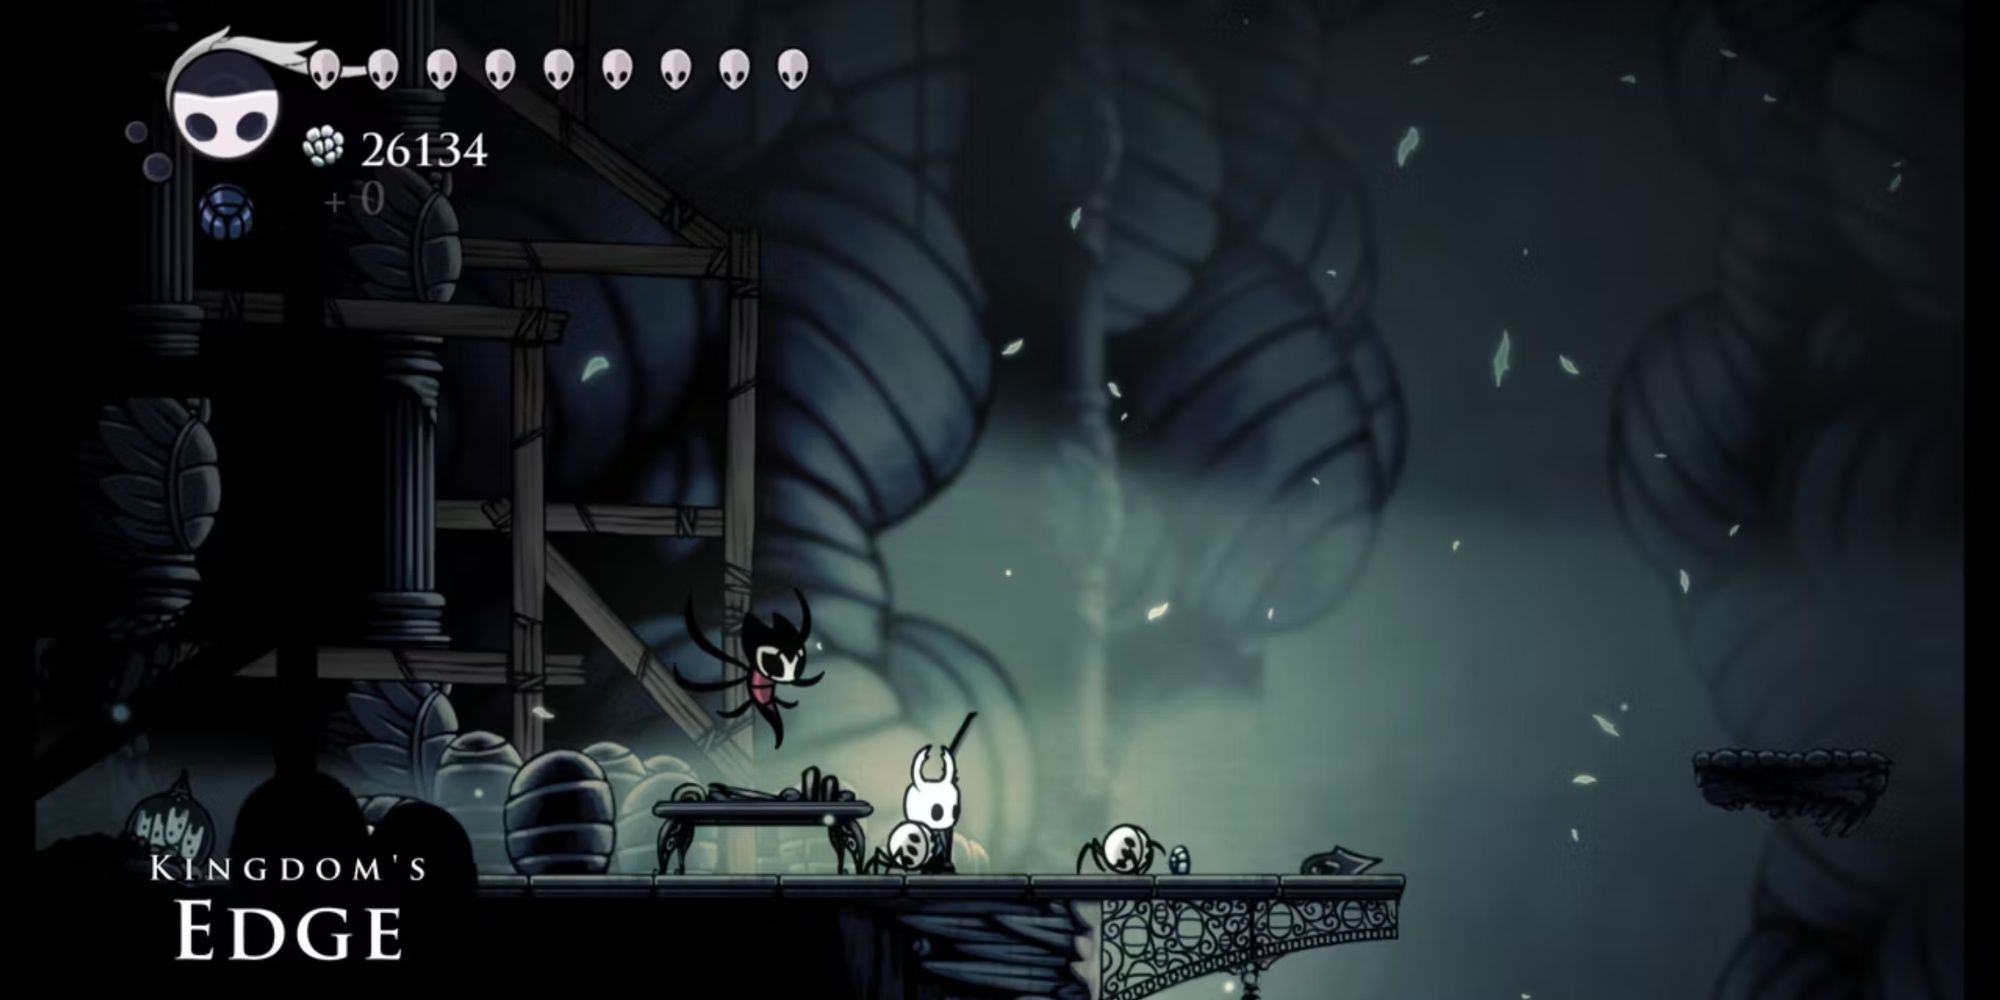 The Knight in Kingdom's Edge in Hollow Knight